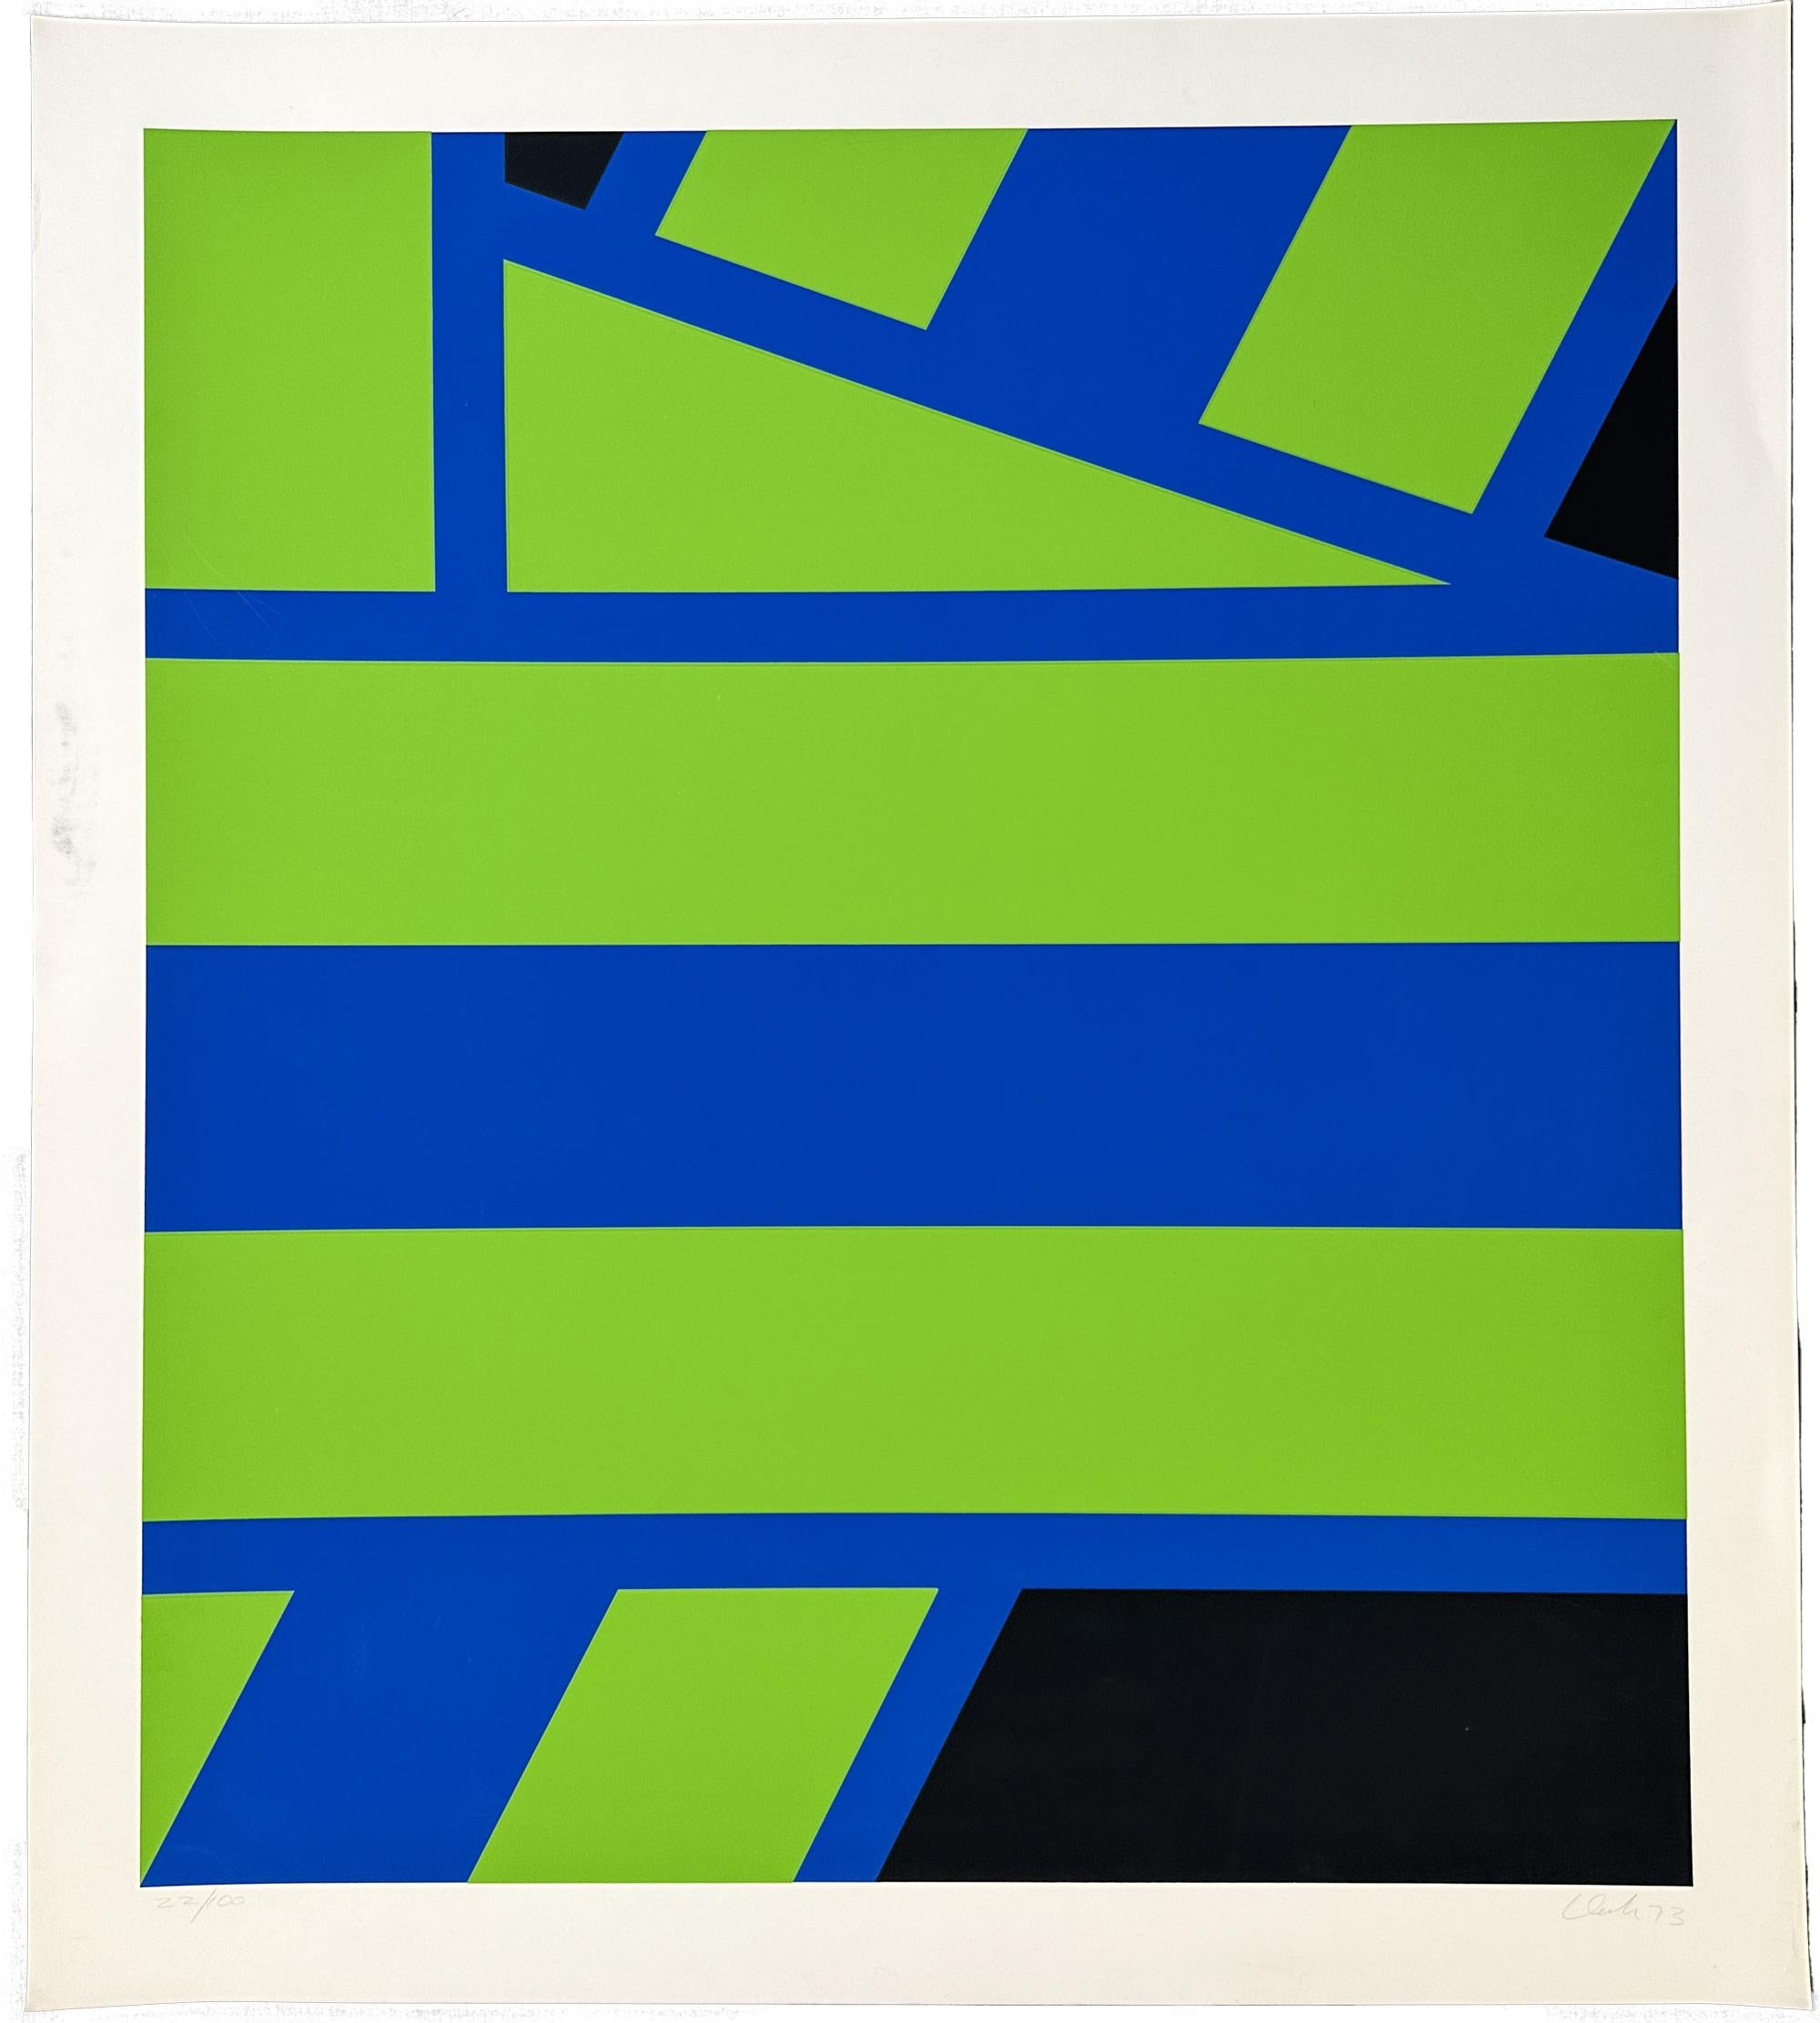 Pierre Clerk
Plate II : Green - 1973
Print - Silkscreen on Somerset paper 32'' x 36''
Edition: Signed in pencil and marked 22/100

image size: 28" x 32" inches

The images of Pierre Clerk’s graphic works directly relate to ideas he uses in his